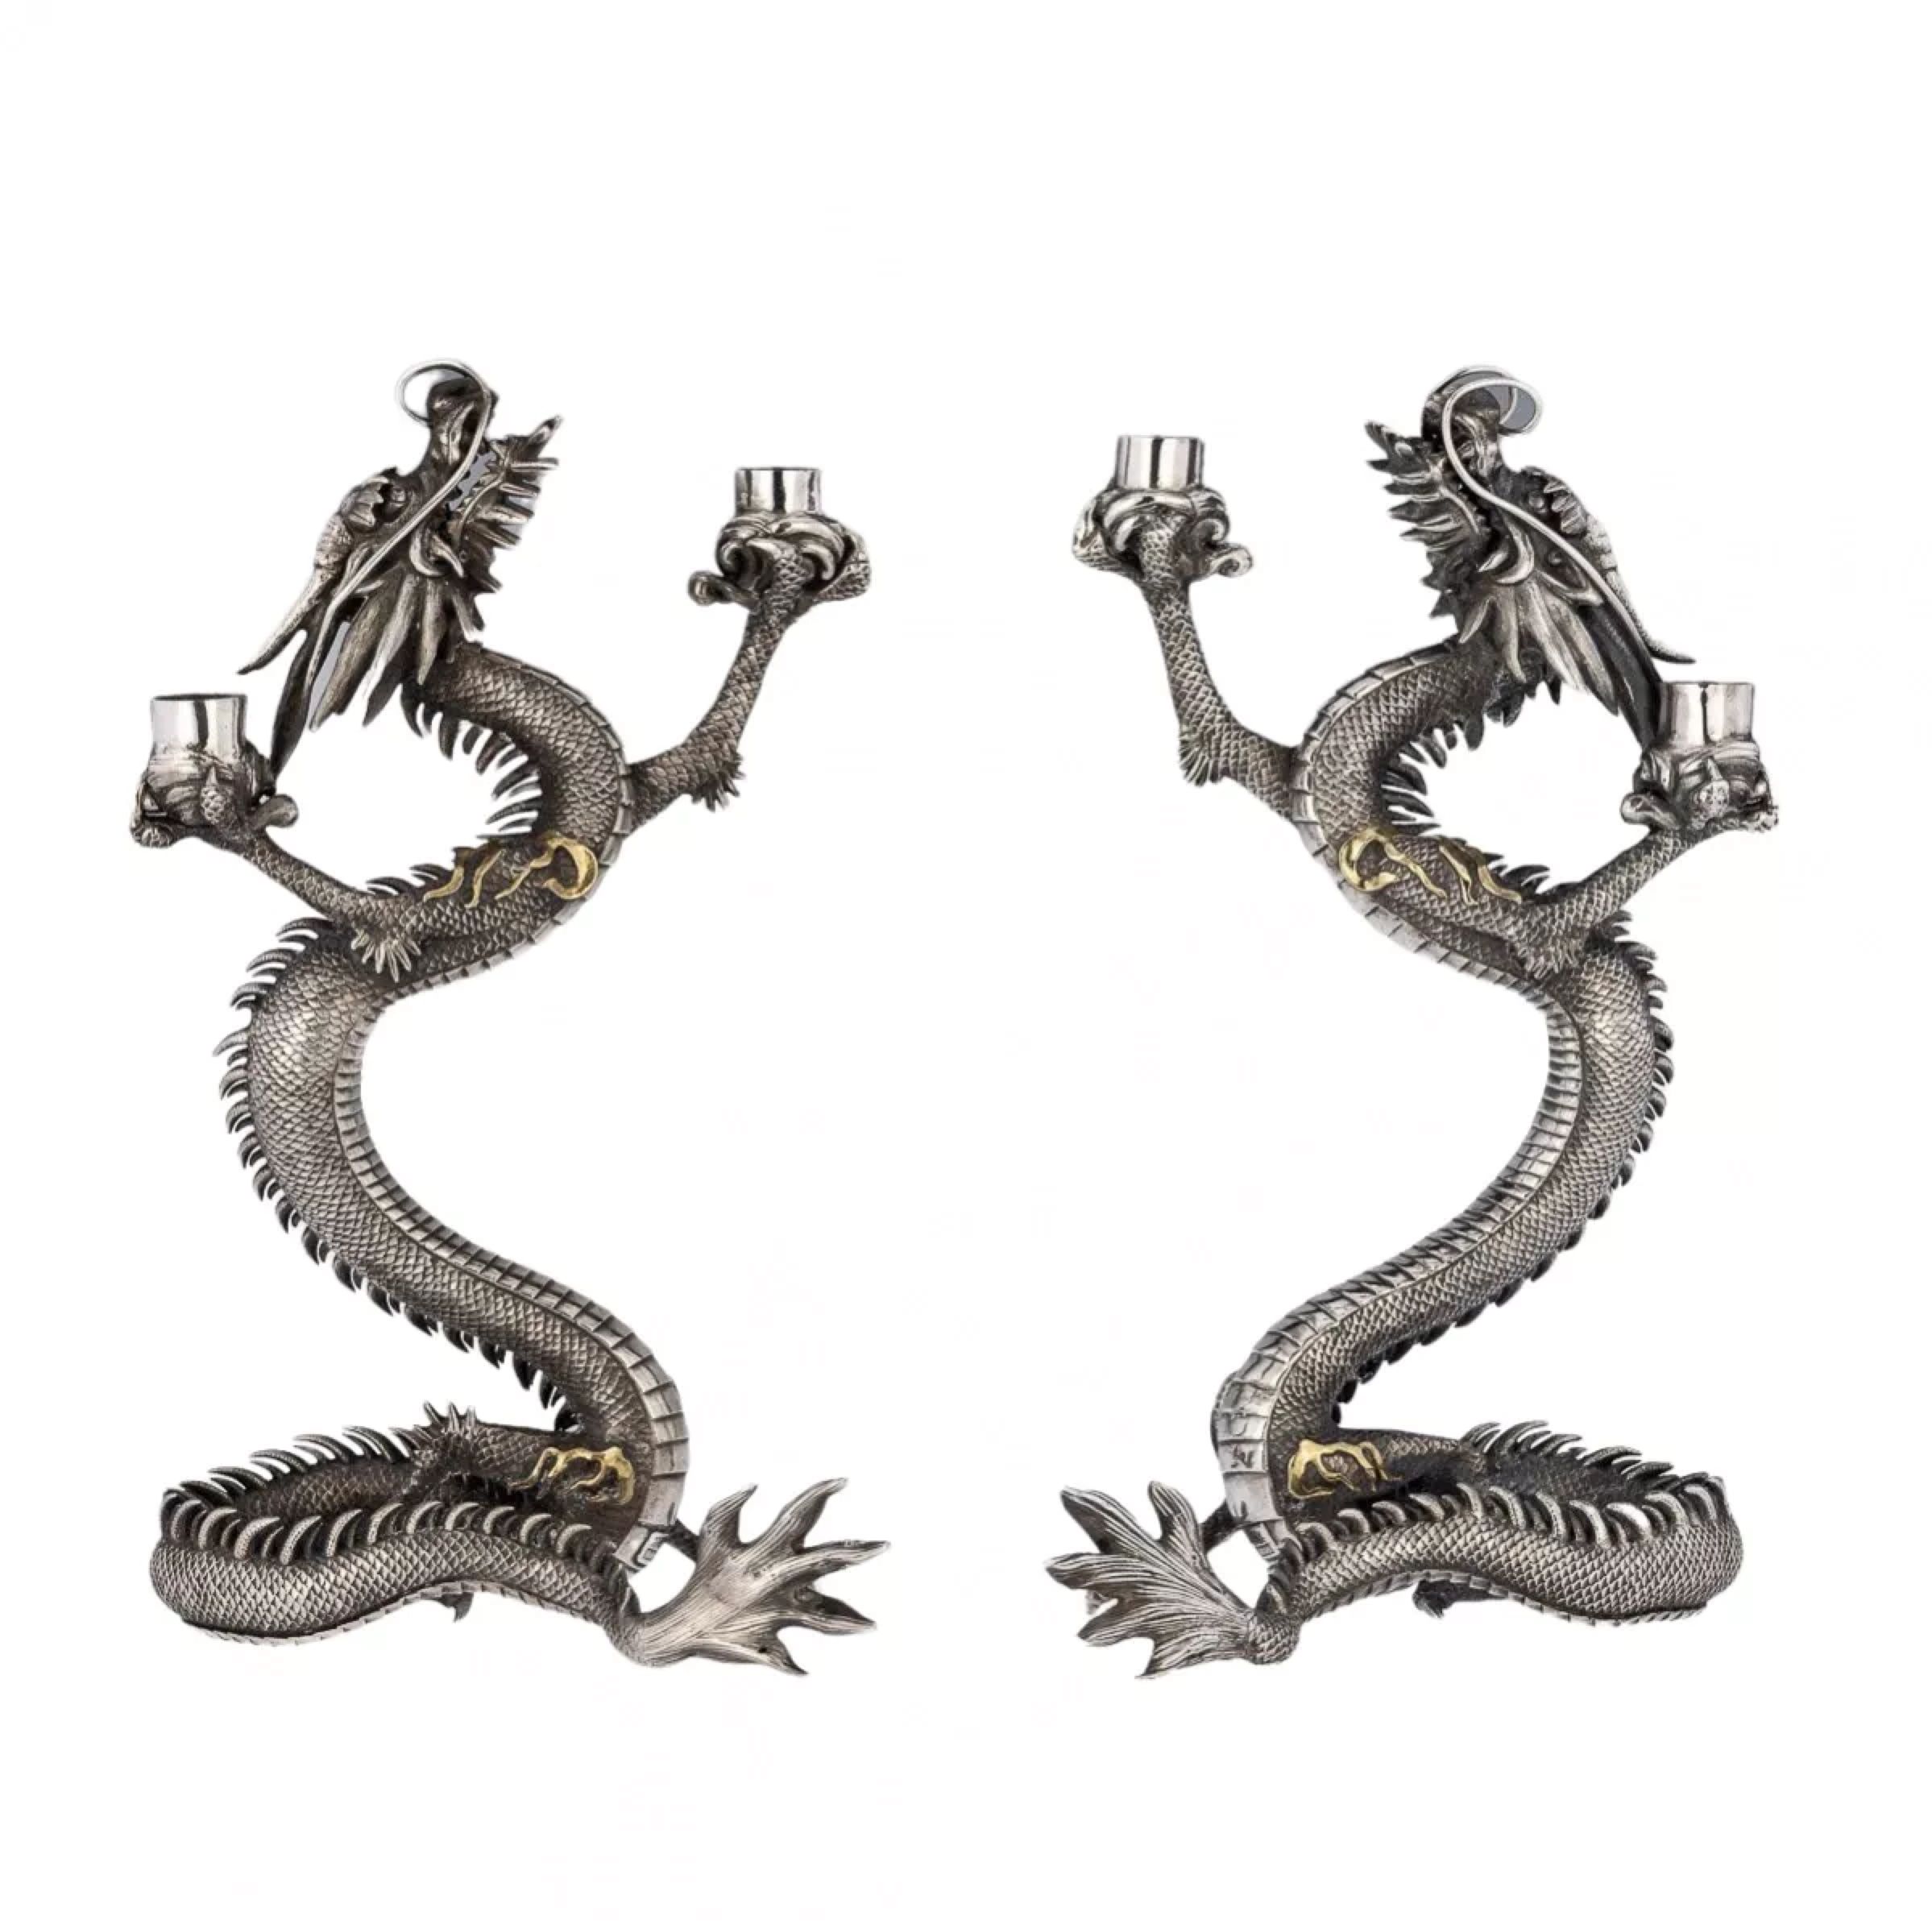 Japanese-silver-candelabra-in-the-form-of-a-dragon-from-the-Meiji-period-of-the-19th-century-